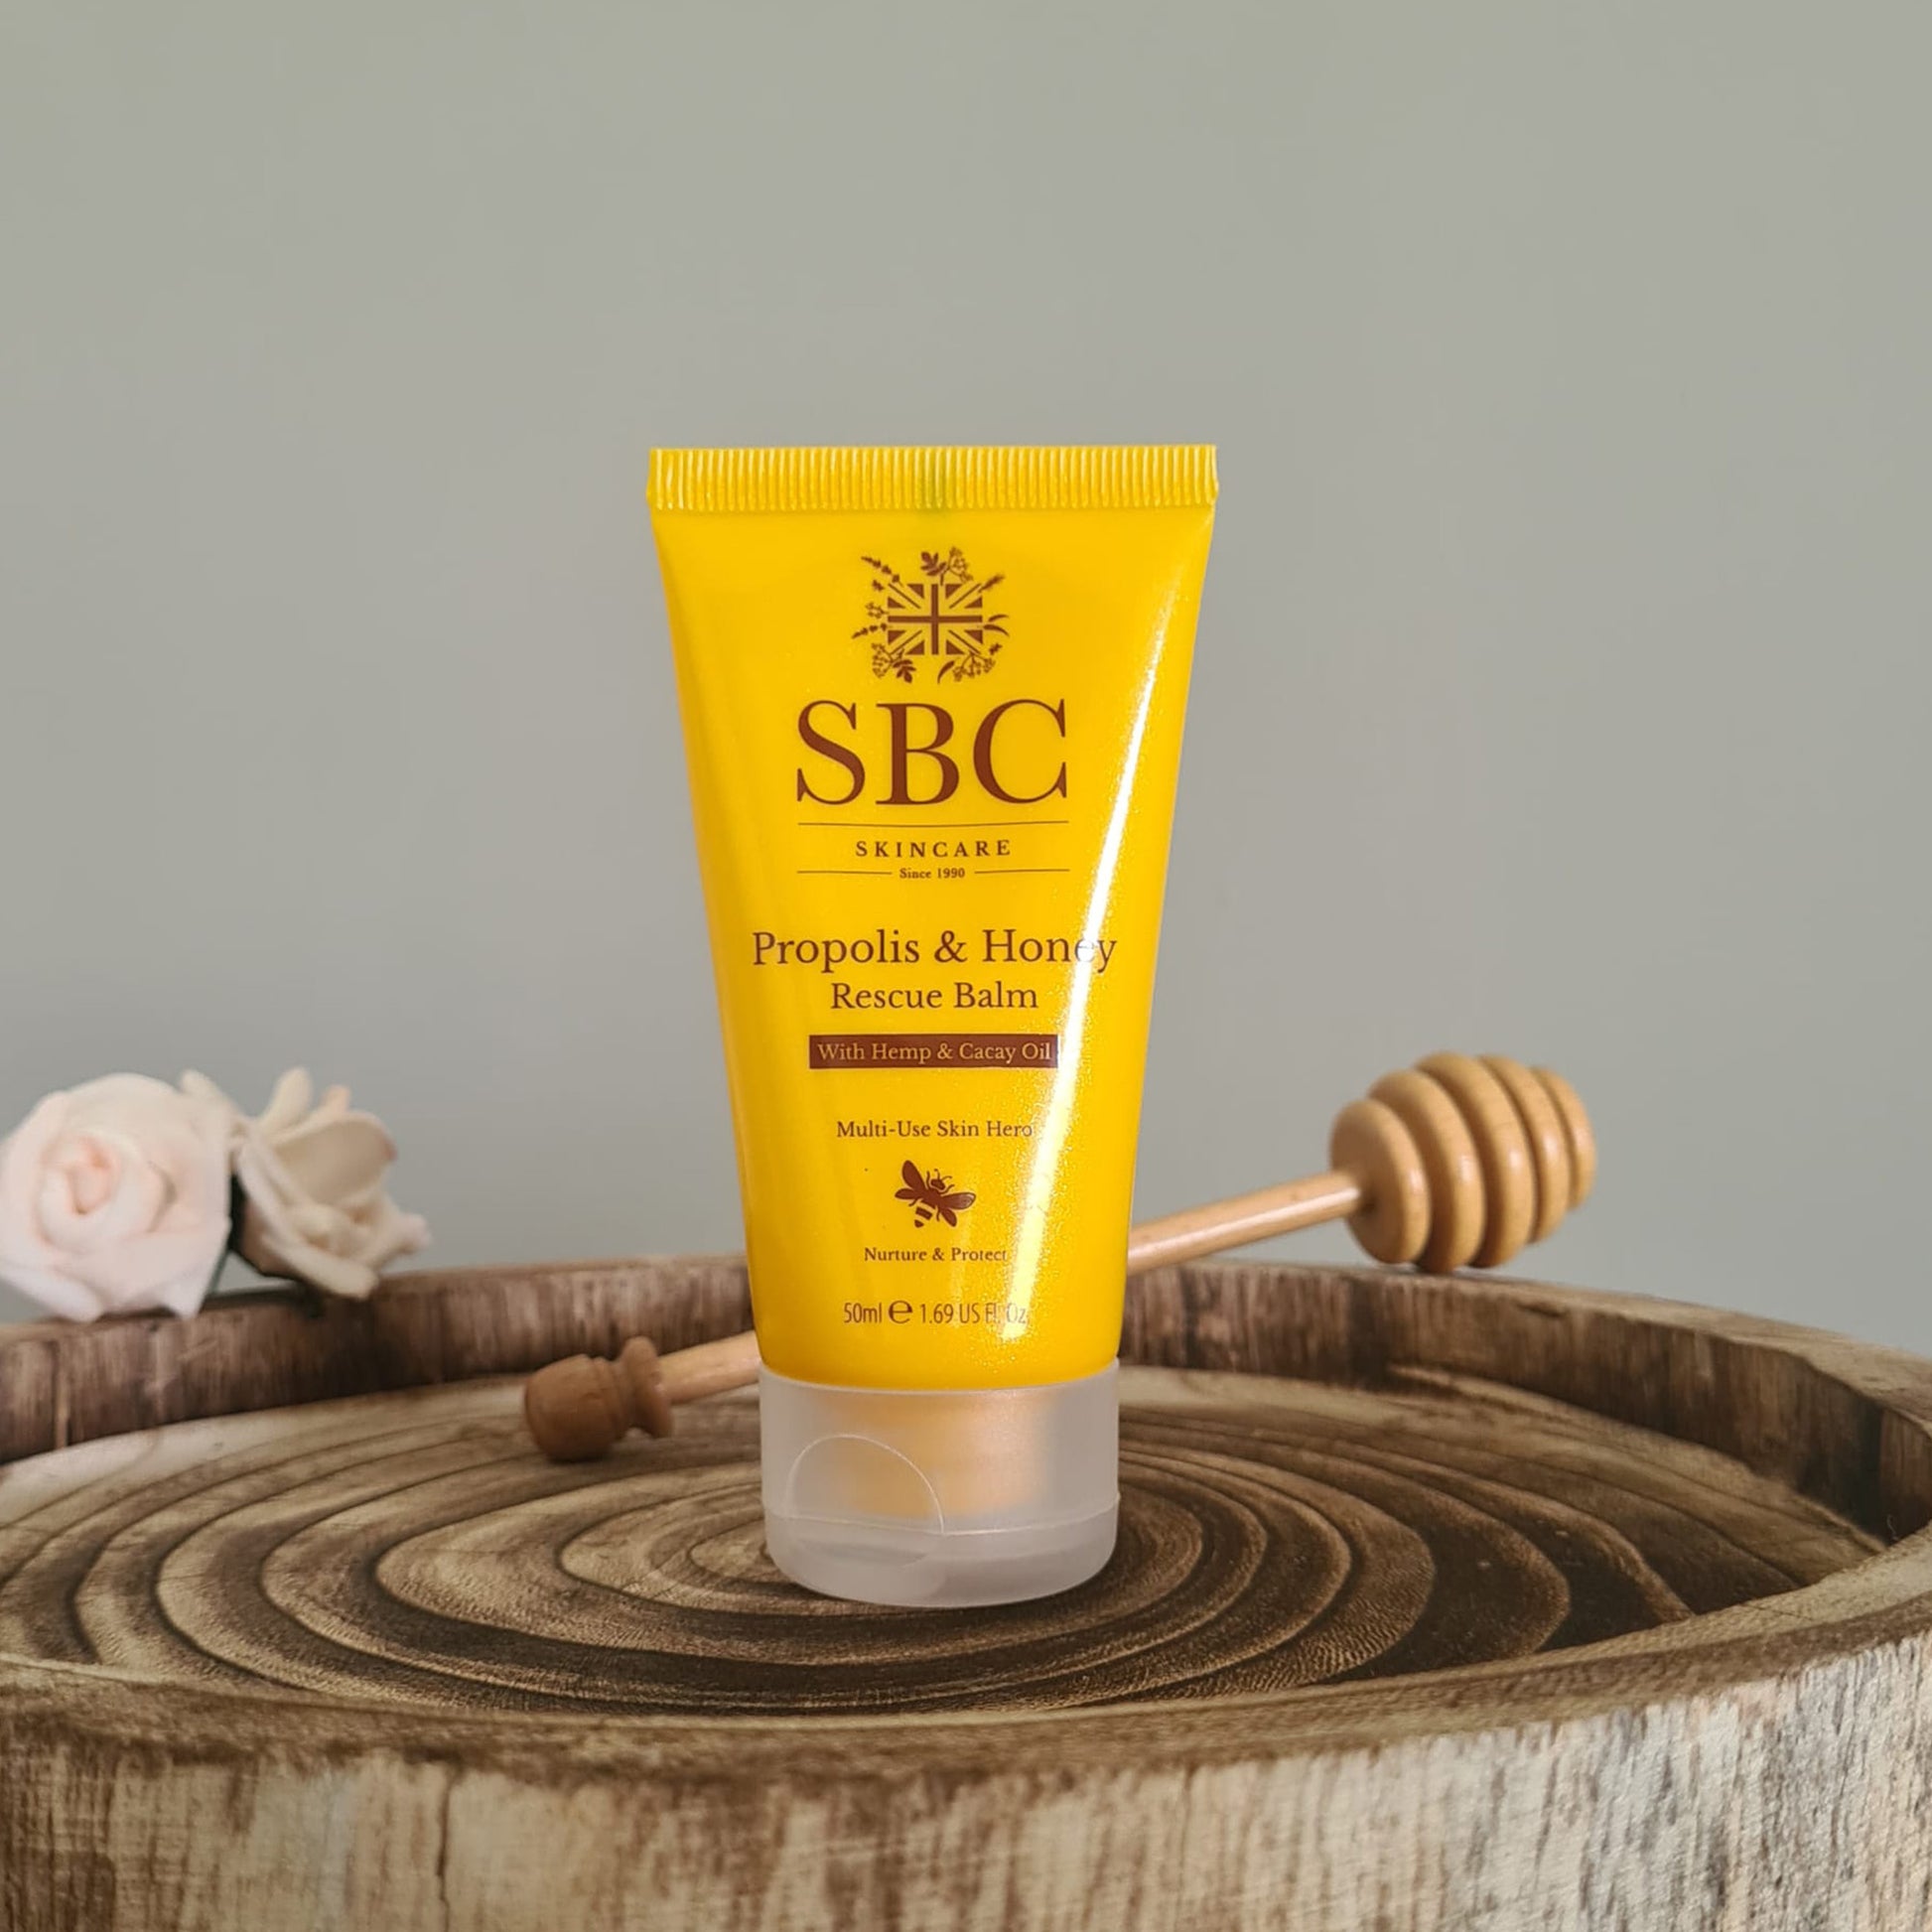 Propolis & Honey Rescue Balm on a wooden stand with flowers